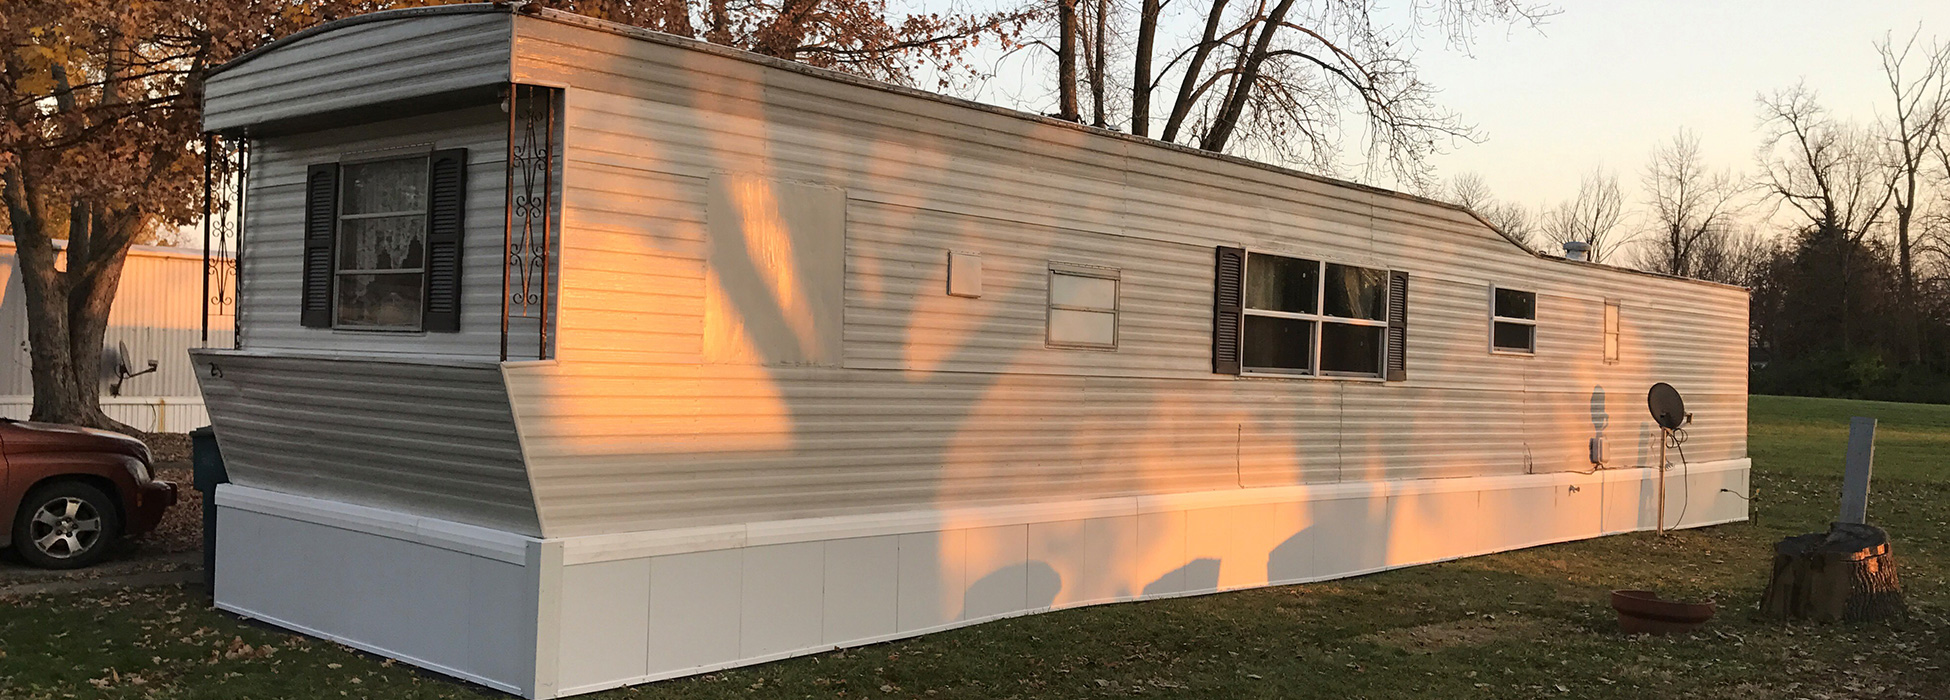 Insulated Skirting Insulated Steel Panels For Mobile Homes